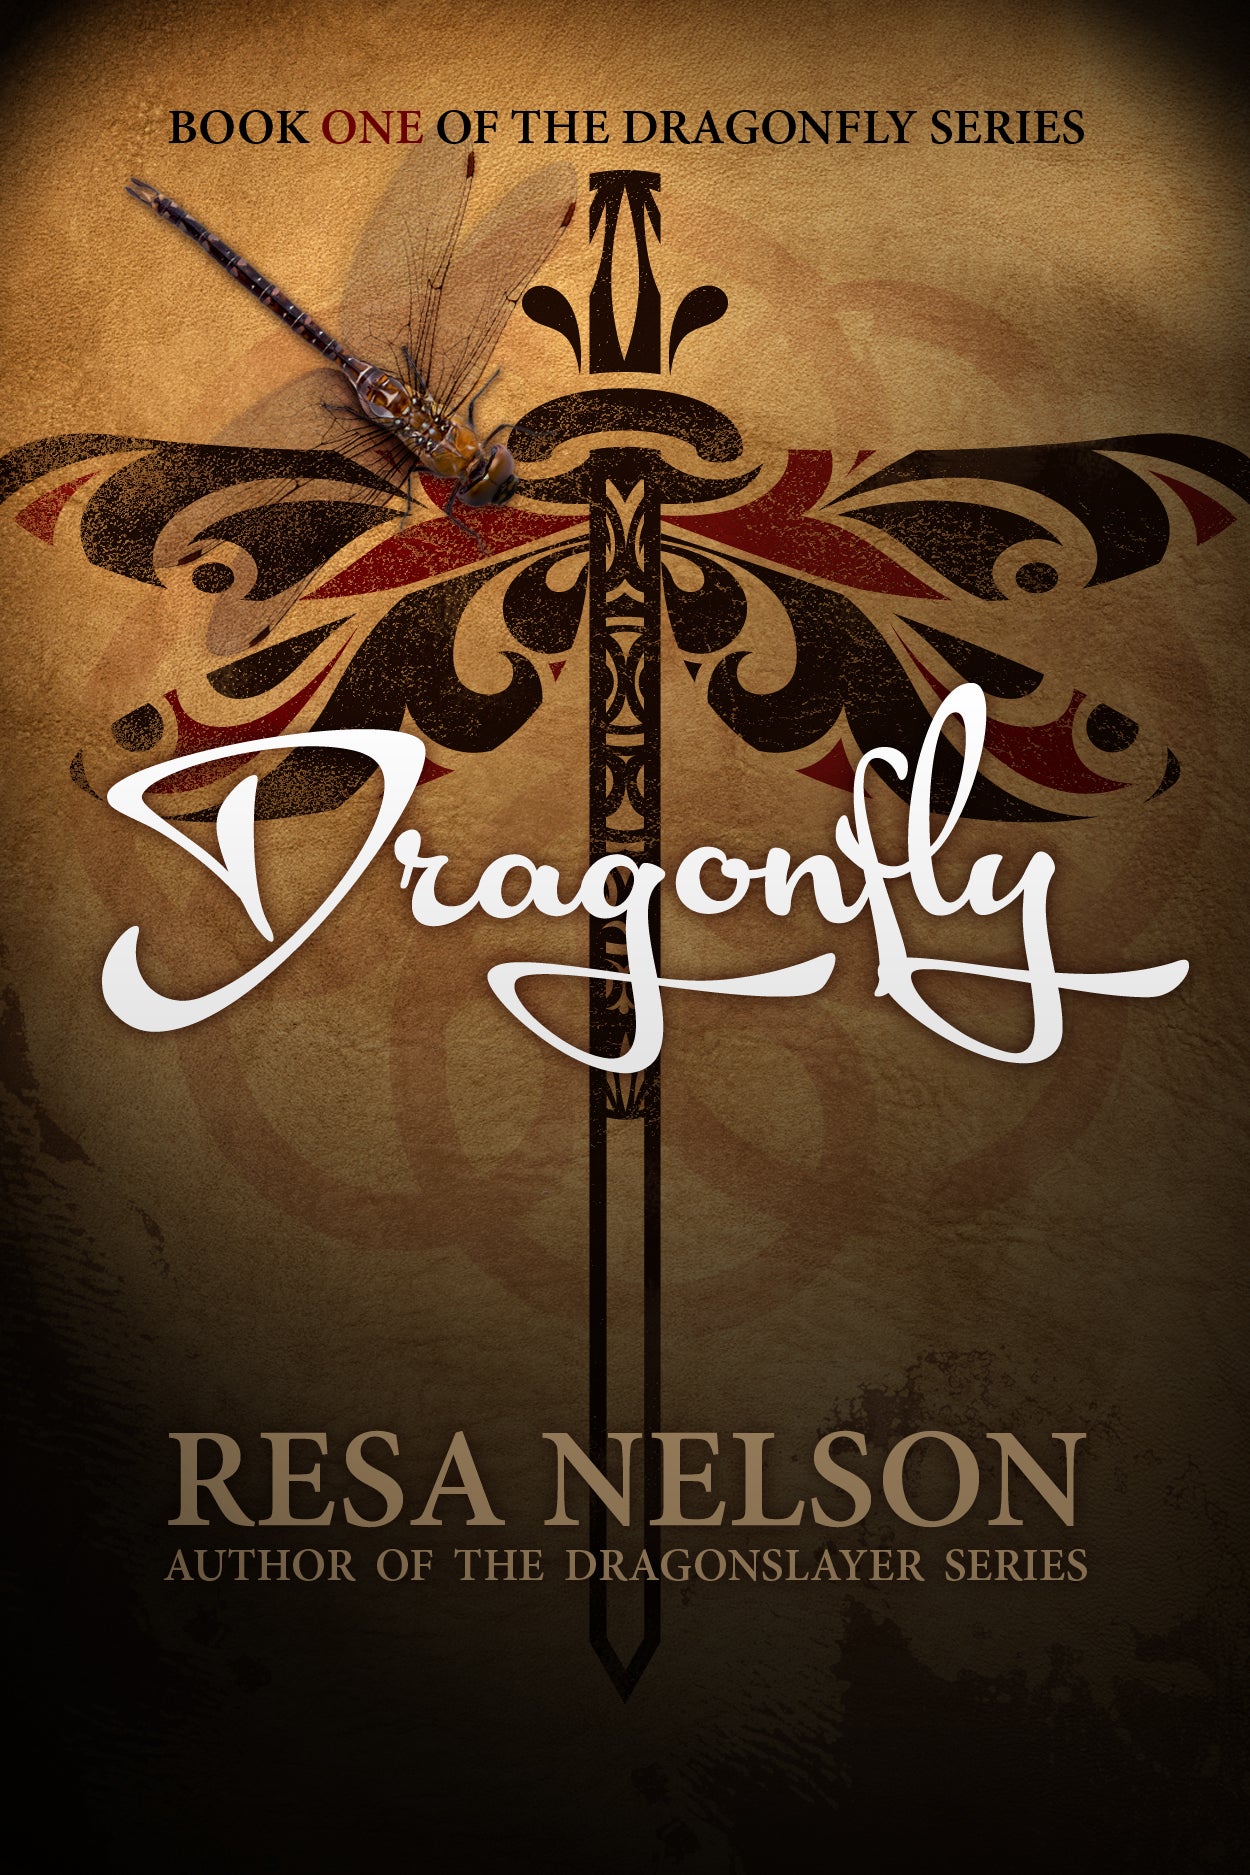 Book Review: Dragonfly by Resa Nelson